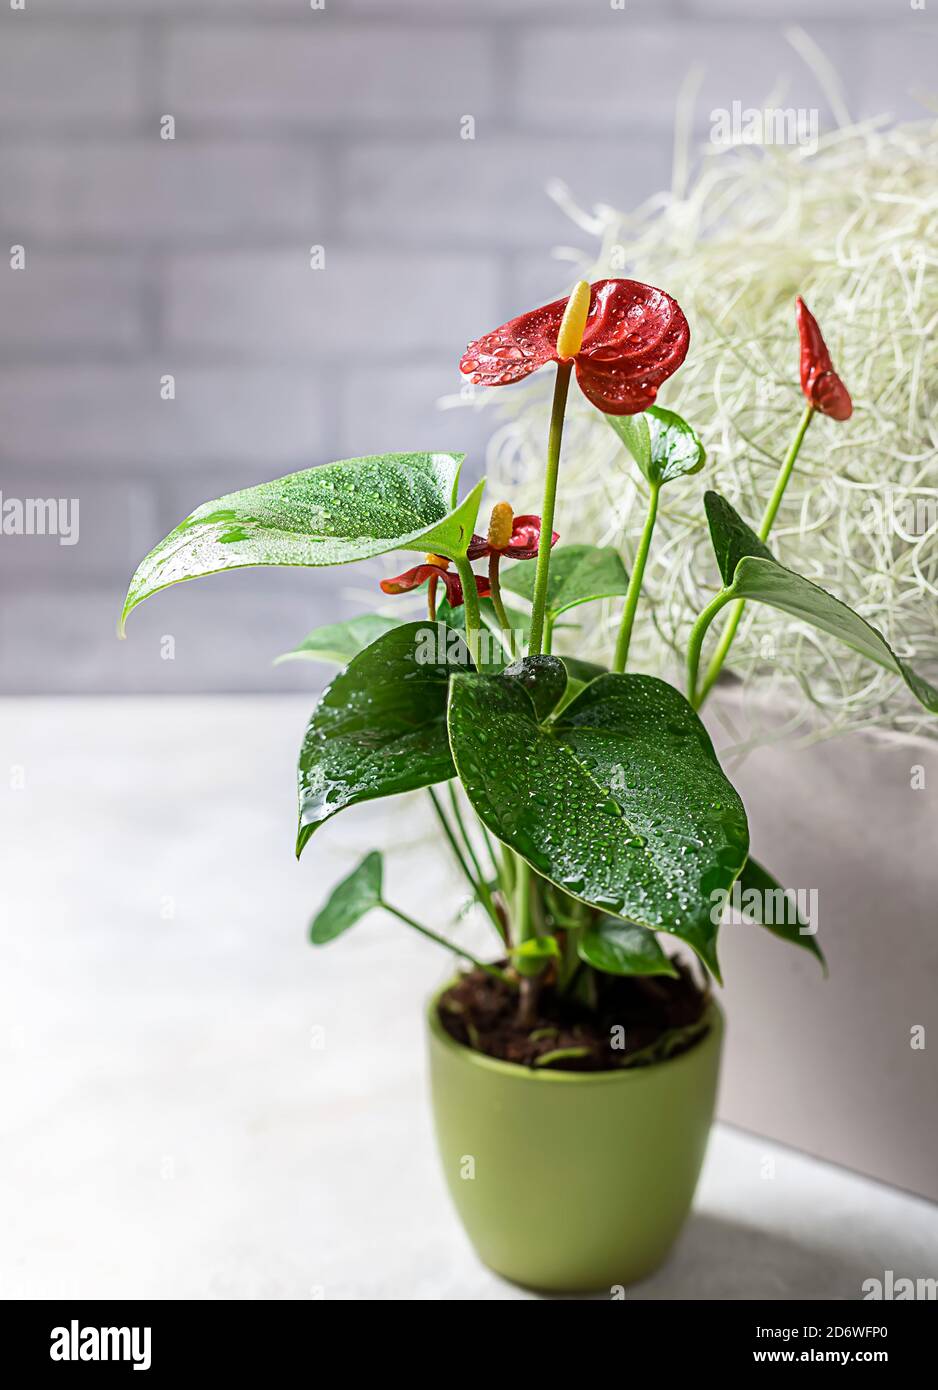 House plant red Anthurium in a pot on a wooden table. Anthurium andreanum. Flower Flamingo flowers or Anthurium andraeanum symbolize hospitality. Stock Photo